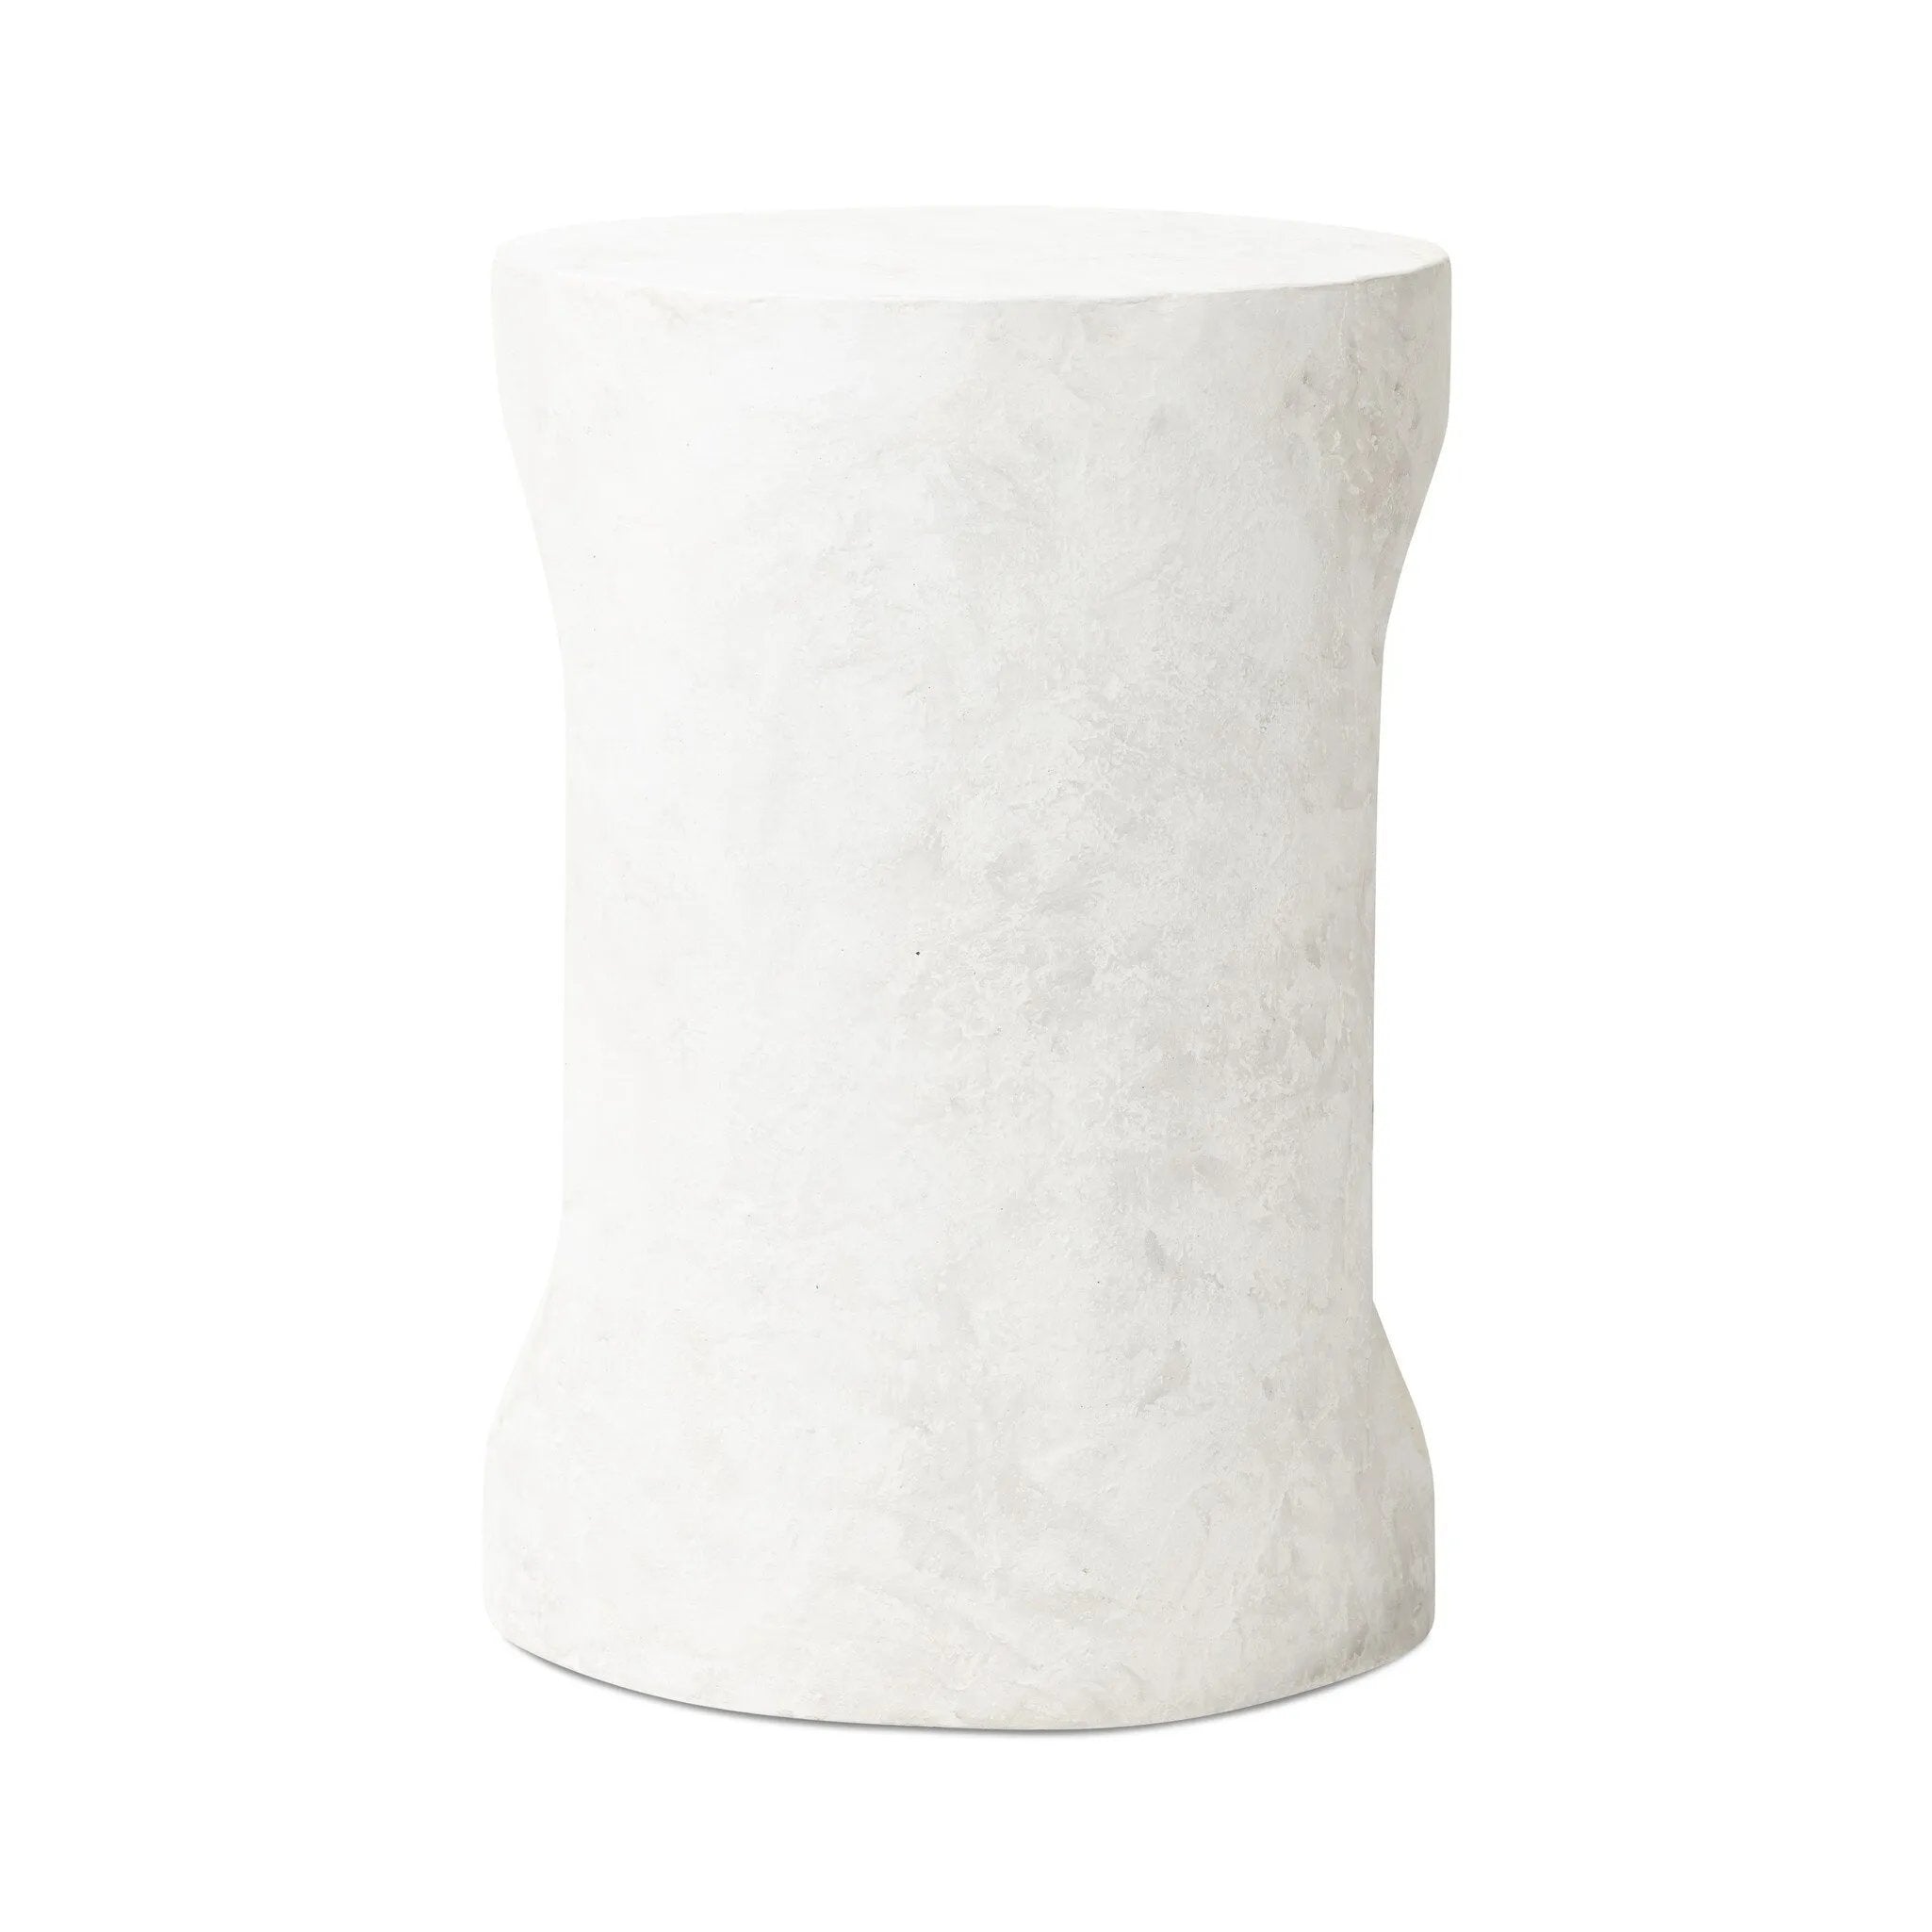 Made from textured white concrete, a cylinder shaped end table features a pill-shaped cutout for a light look. Subtle mottling adds a hint of texture.Collection: Chandle Amethyst Home provides interior design, new home construction design consulting, vintage area rugs, and lighting in the Salt Lake City metro area.